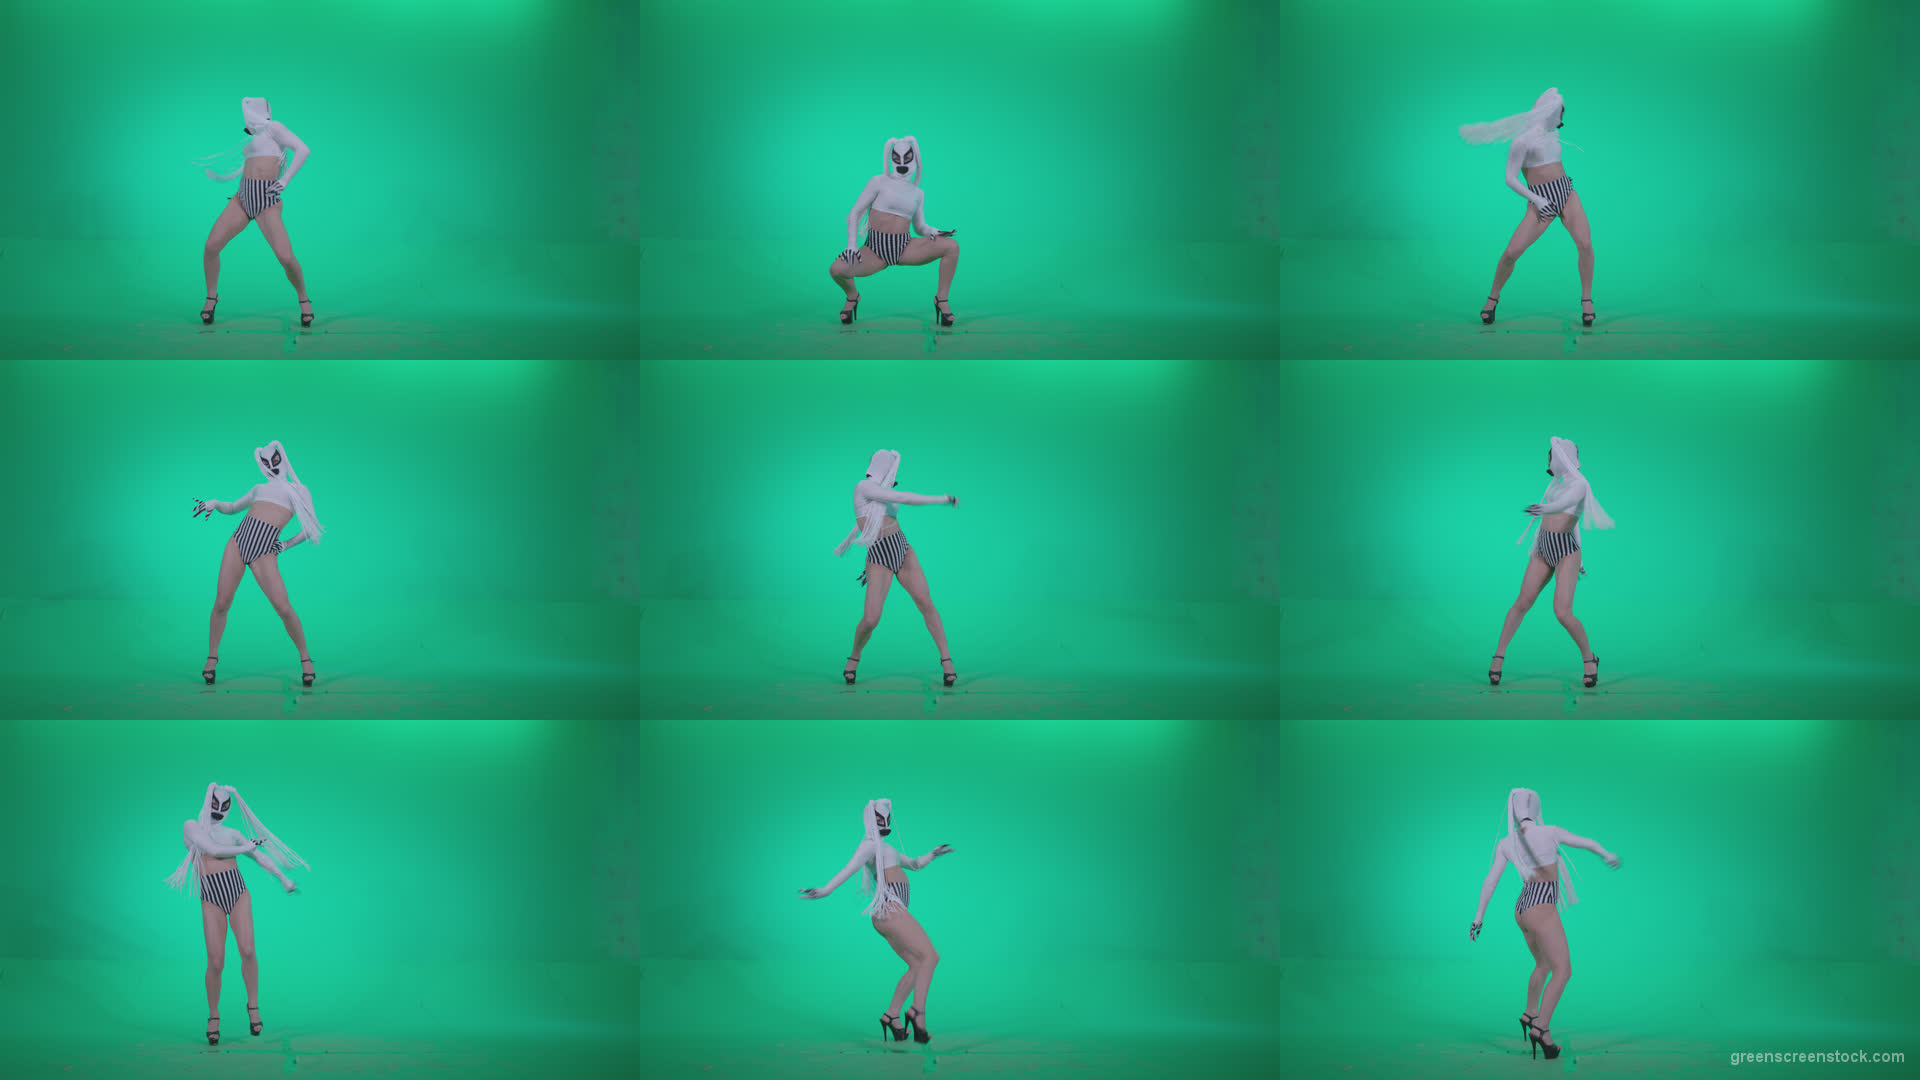 Go-go-Dancer-with-Latex-Top-t7-Green-Screen-Video-Footage Green Screen Stock